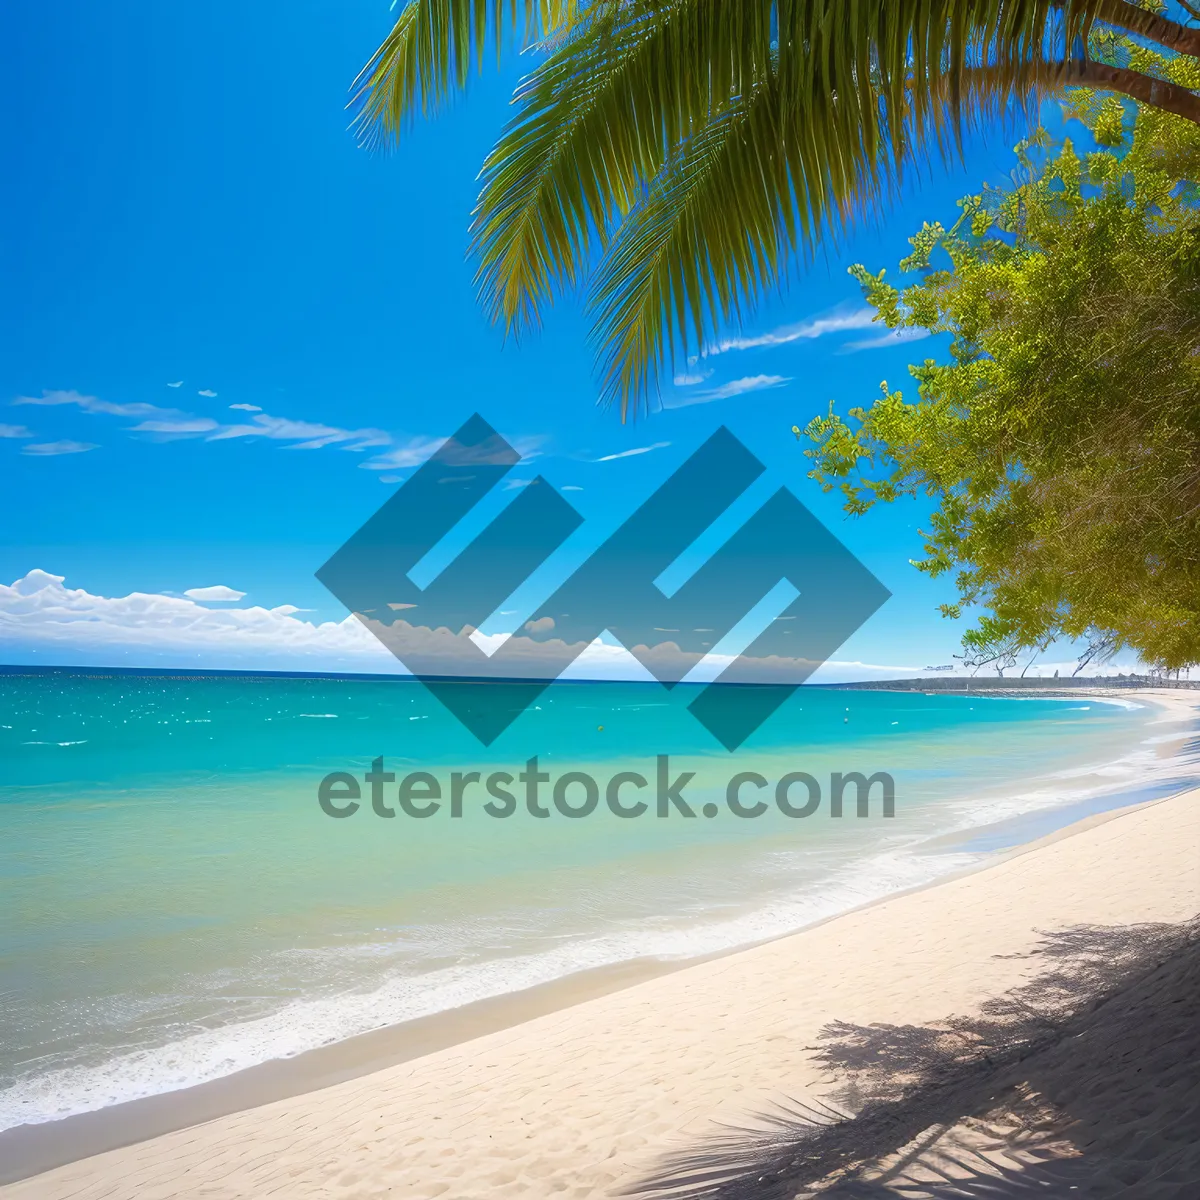 Picture of Tranquil Tropical Paradise by the Turquoise Sea